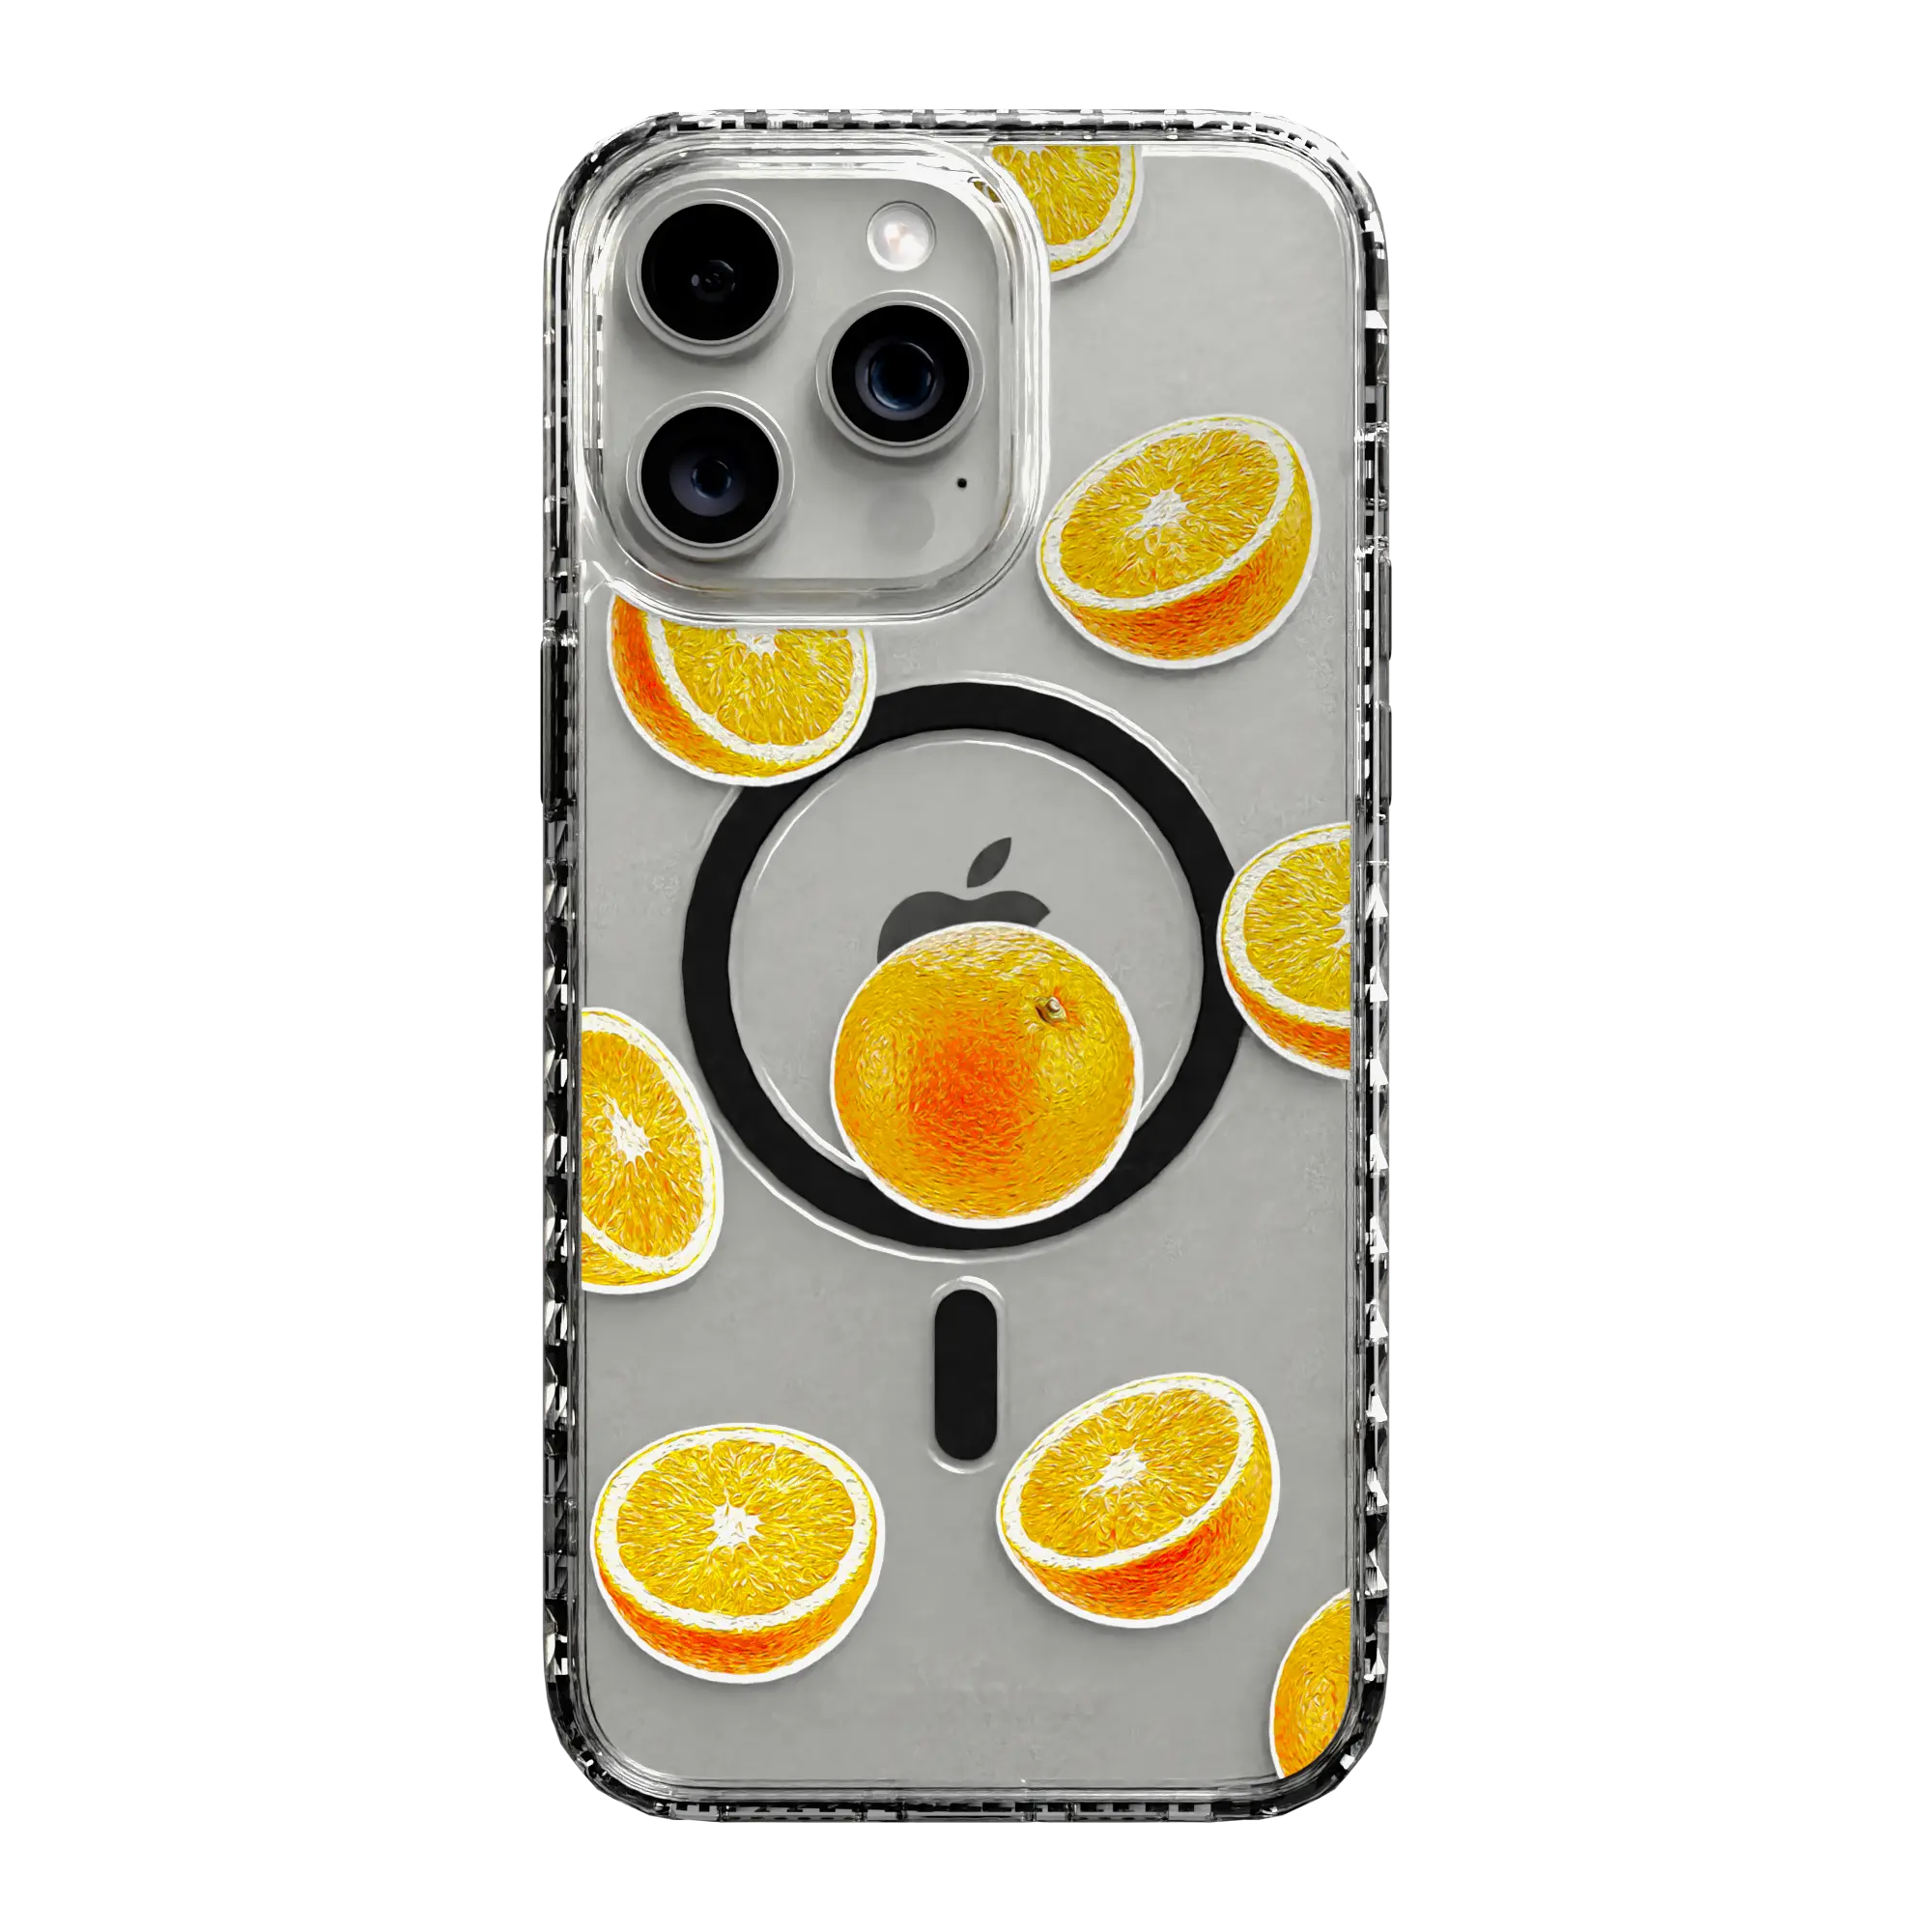 Apple-iPhone-14-Pro-Max-Crystal-Clear Orange Zest | Protective MagSafe Case | Fruits Collection for Apple iPhone 14 Series cellhelmet cellhelmet